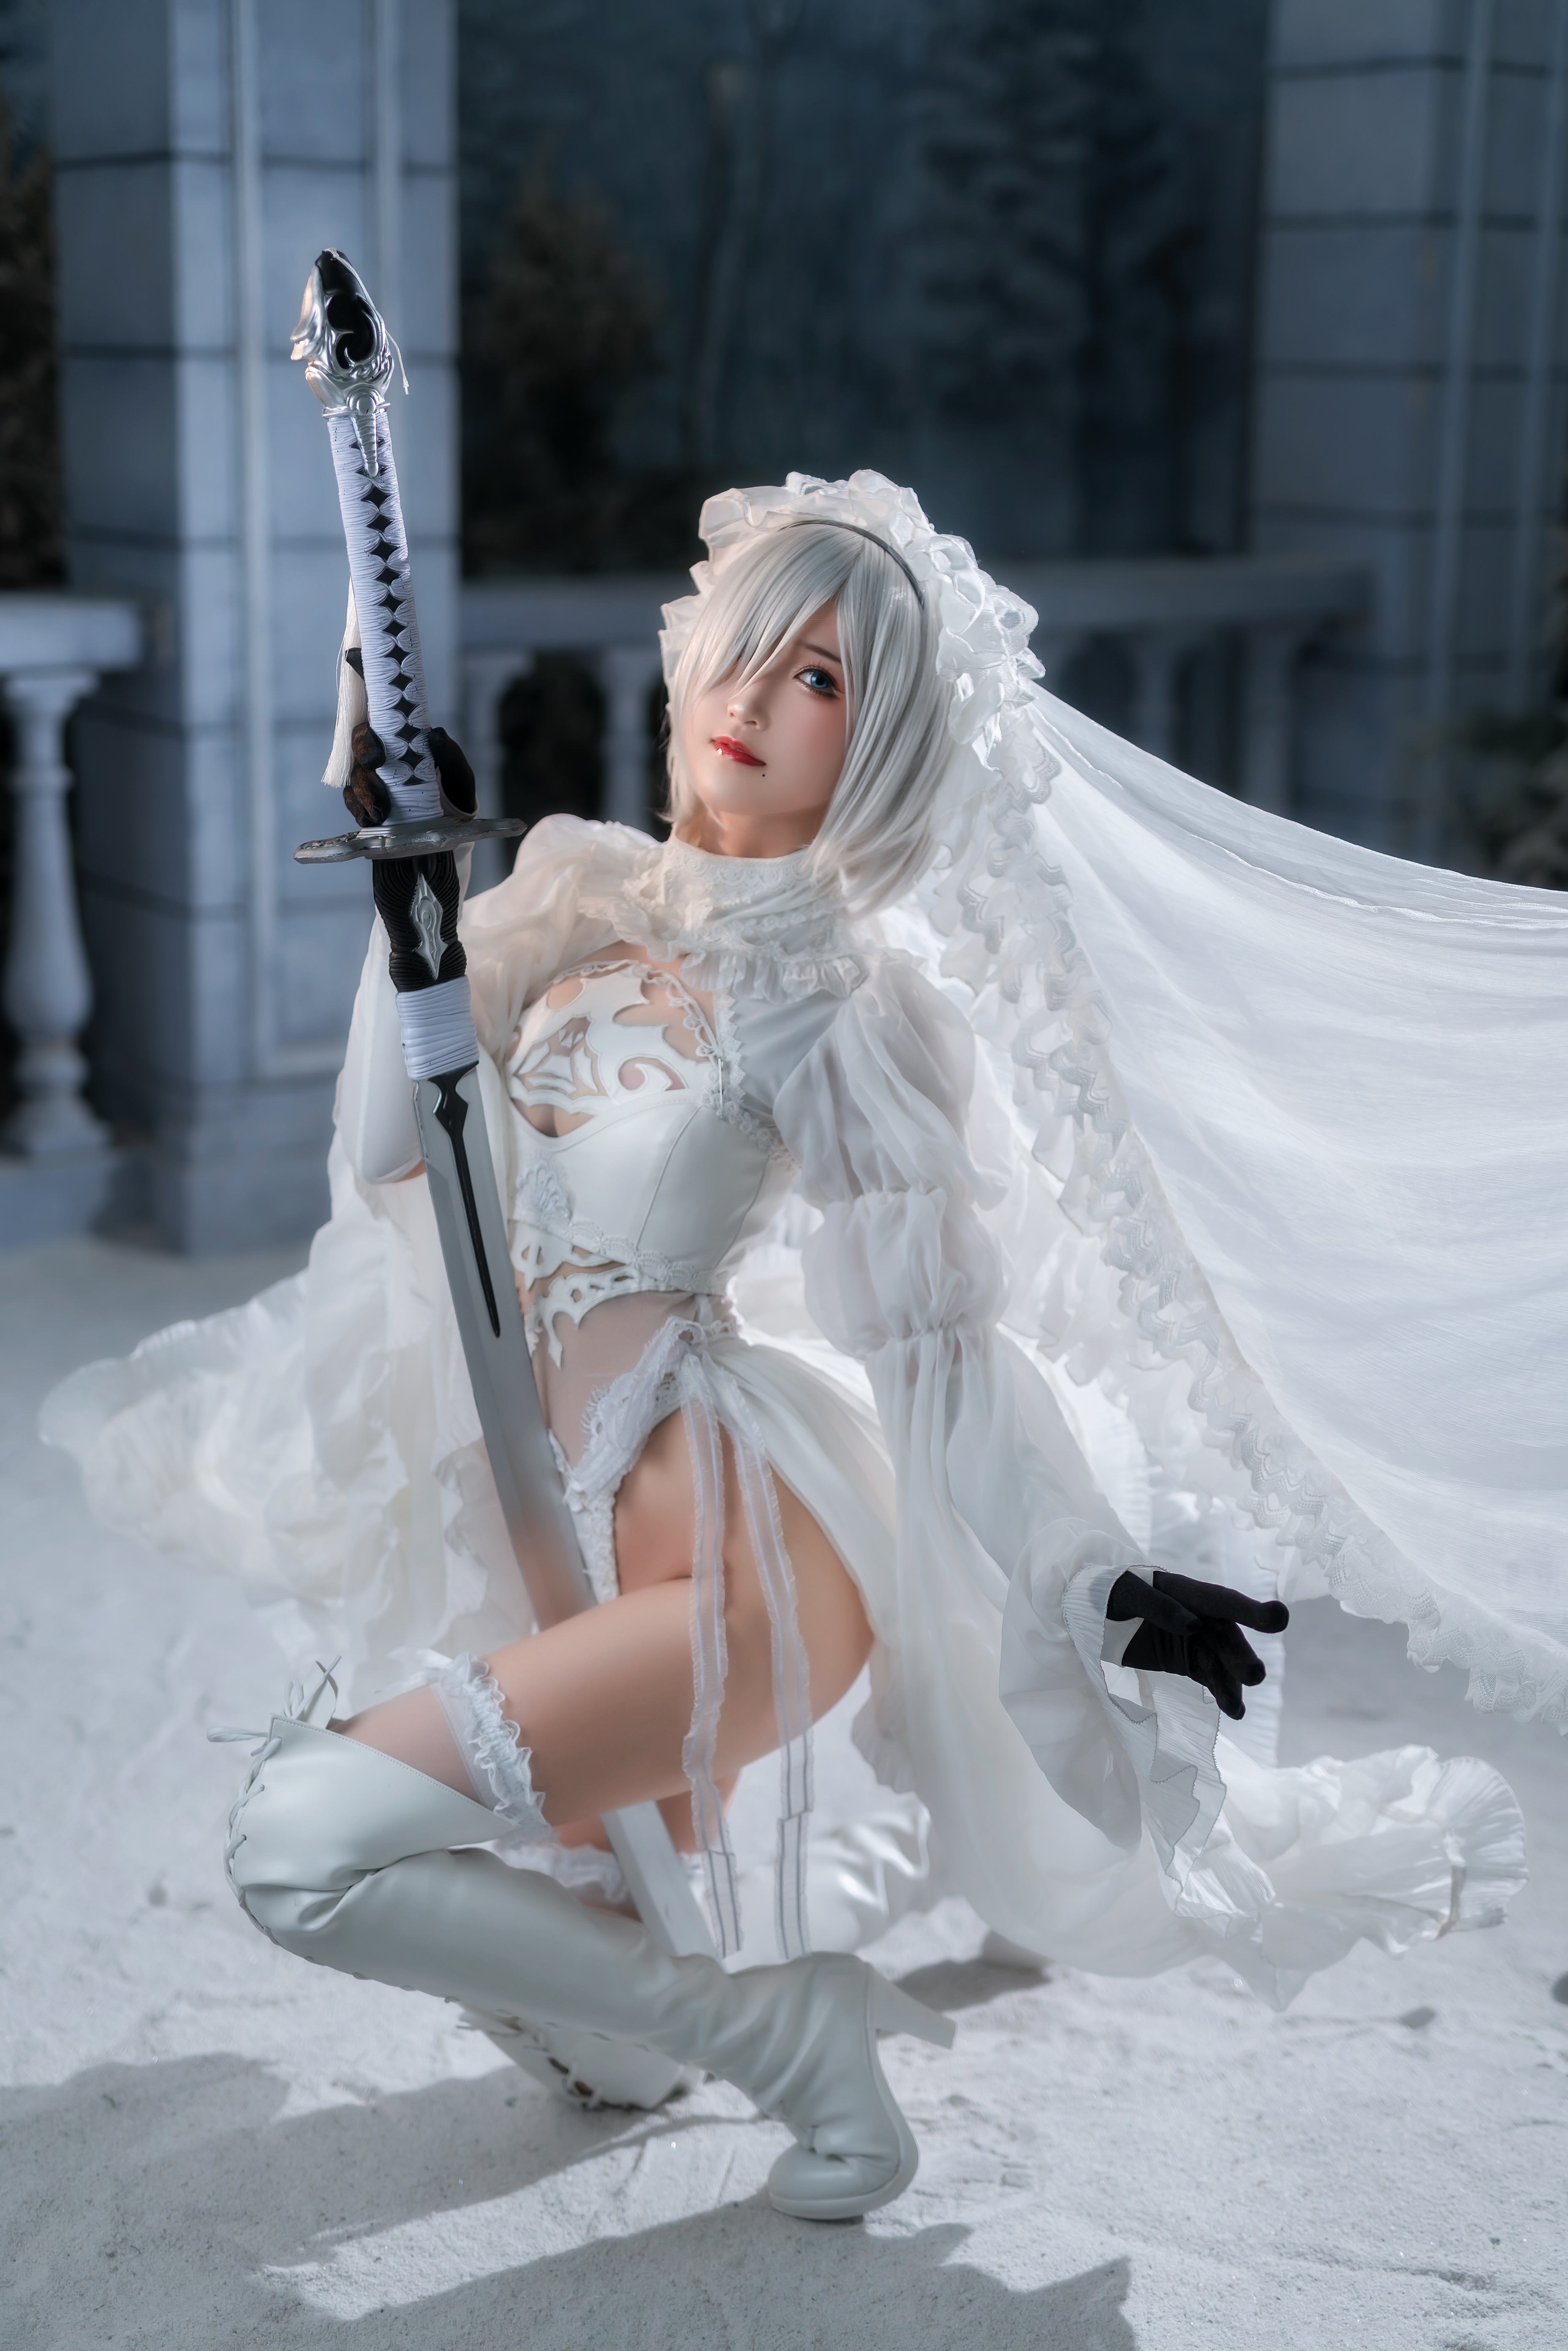 People 3713x5567 women model Asian cosplay Nier: Automata 2B (Nier: Automata) brides indoors katana looking at viewer women indoors veils stockings white stockings bodysuit lingerie thigh high boots kneeling Sandu 69 gloves hips anime girls anime red lipstick see-through clothing